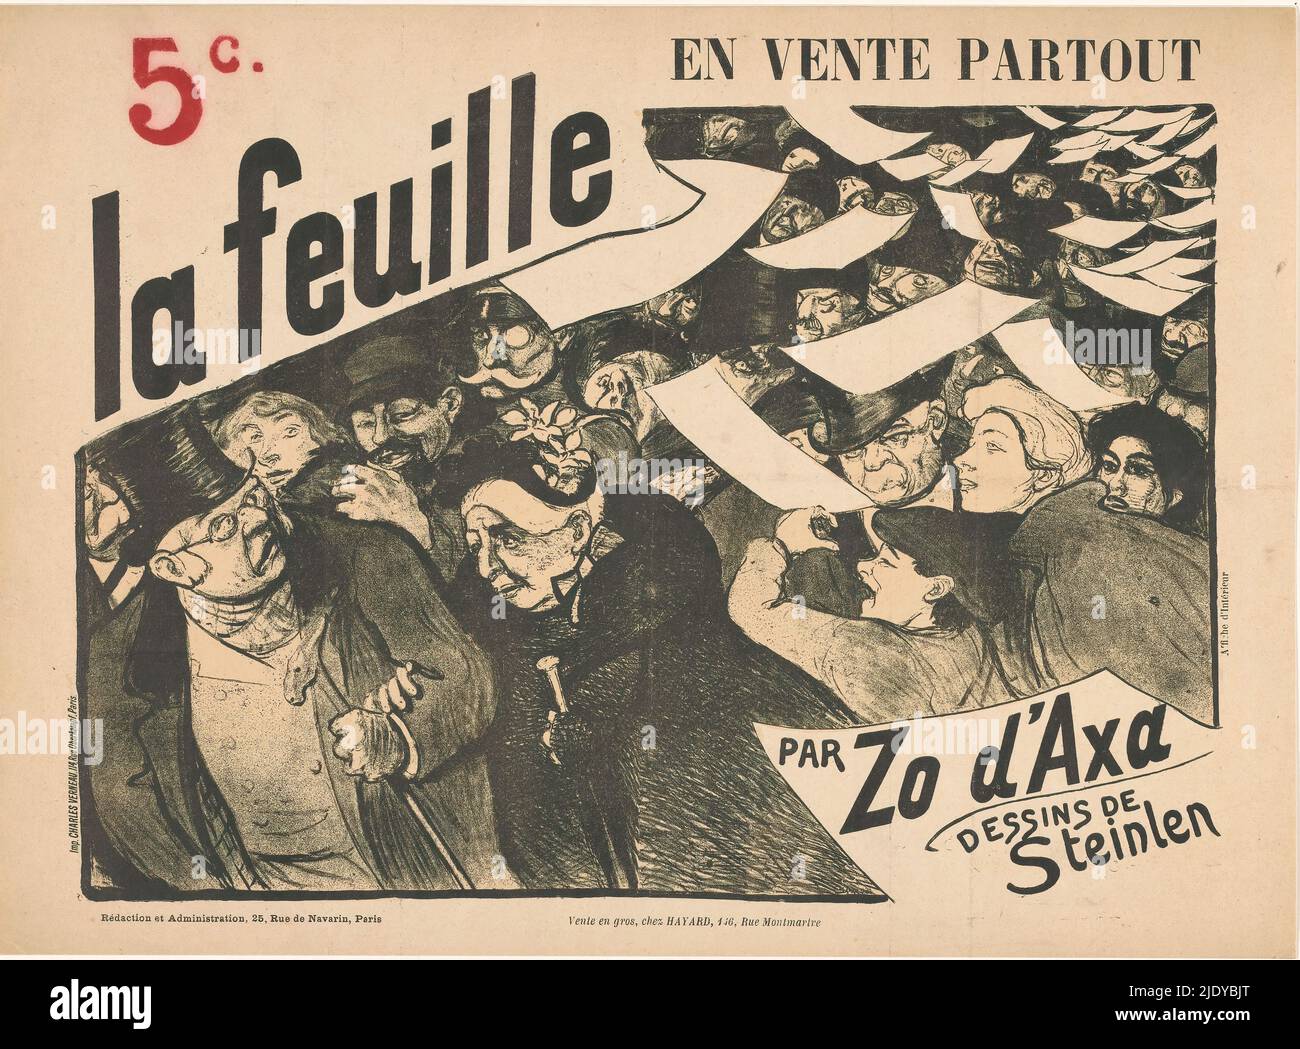 Advertising bill for La feuille by Zo d'Axa, News sheets swirl down on a crowd of people. In front a man in a hat and walking stick with a woman on his arm., print maker: Sarar, (mentioned on object), after design by: Théophile Alexandre Steinlen, (mentioned on object), printer: Charles Verneau, (mentioned on object), Paris, 1897 - 1899, paper, brush, height 410 mm × width 299 mm Stock Photo